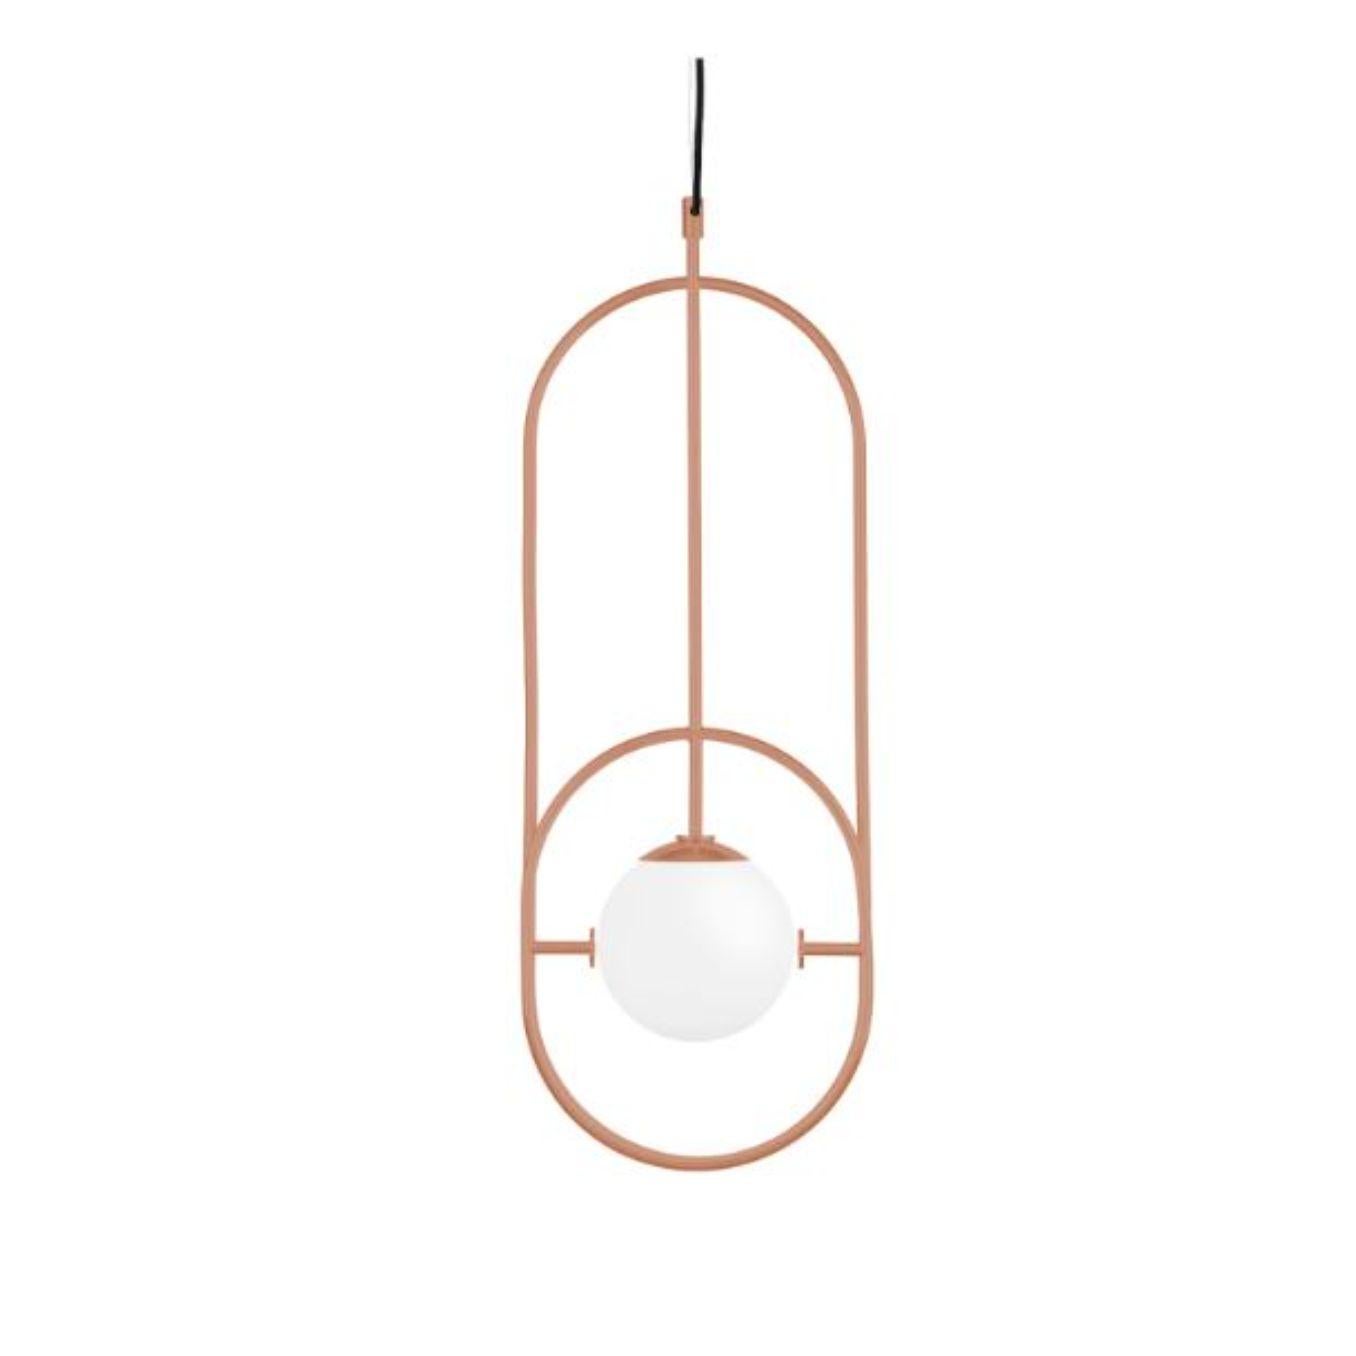 Salmon loop I suspension lamp by Dooq
Dimensions: W 26.5 x D 15 x H 73 cm
Materials: lacquered metal, polished or brushed metal.
Also available in different colours and materials.

Information:
230V/50Hz
1 x max. G9
4W LED

120V/60Hz
1 x max. G9
4W